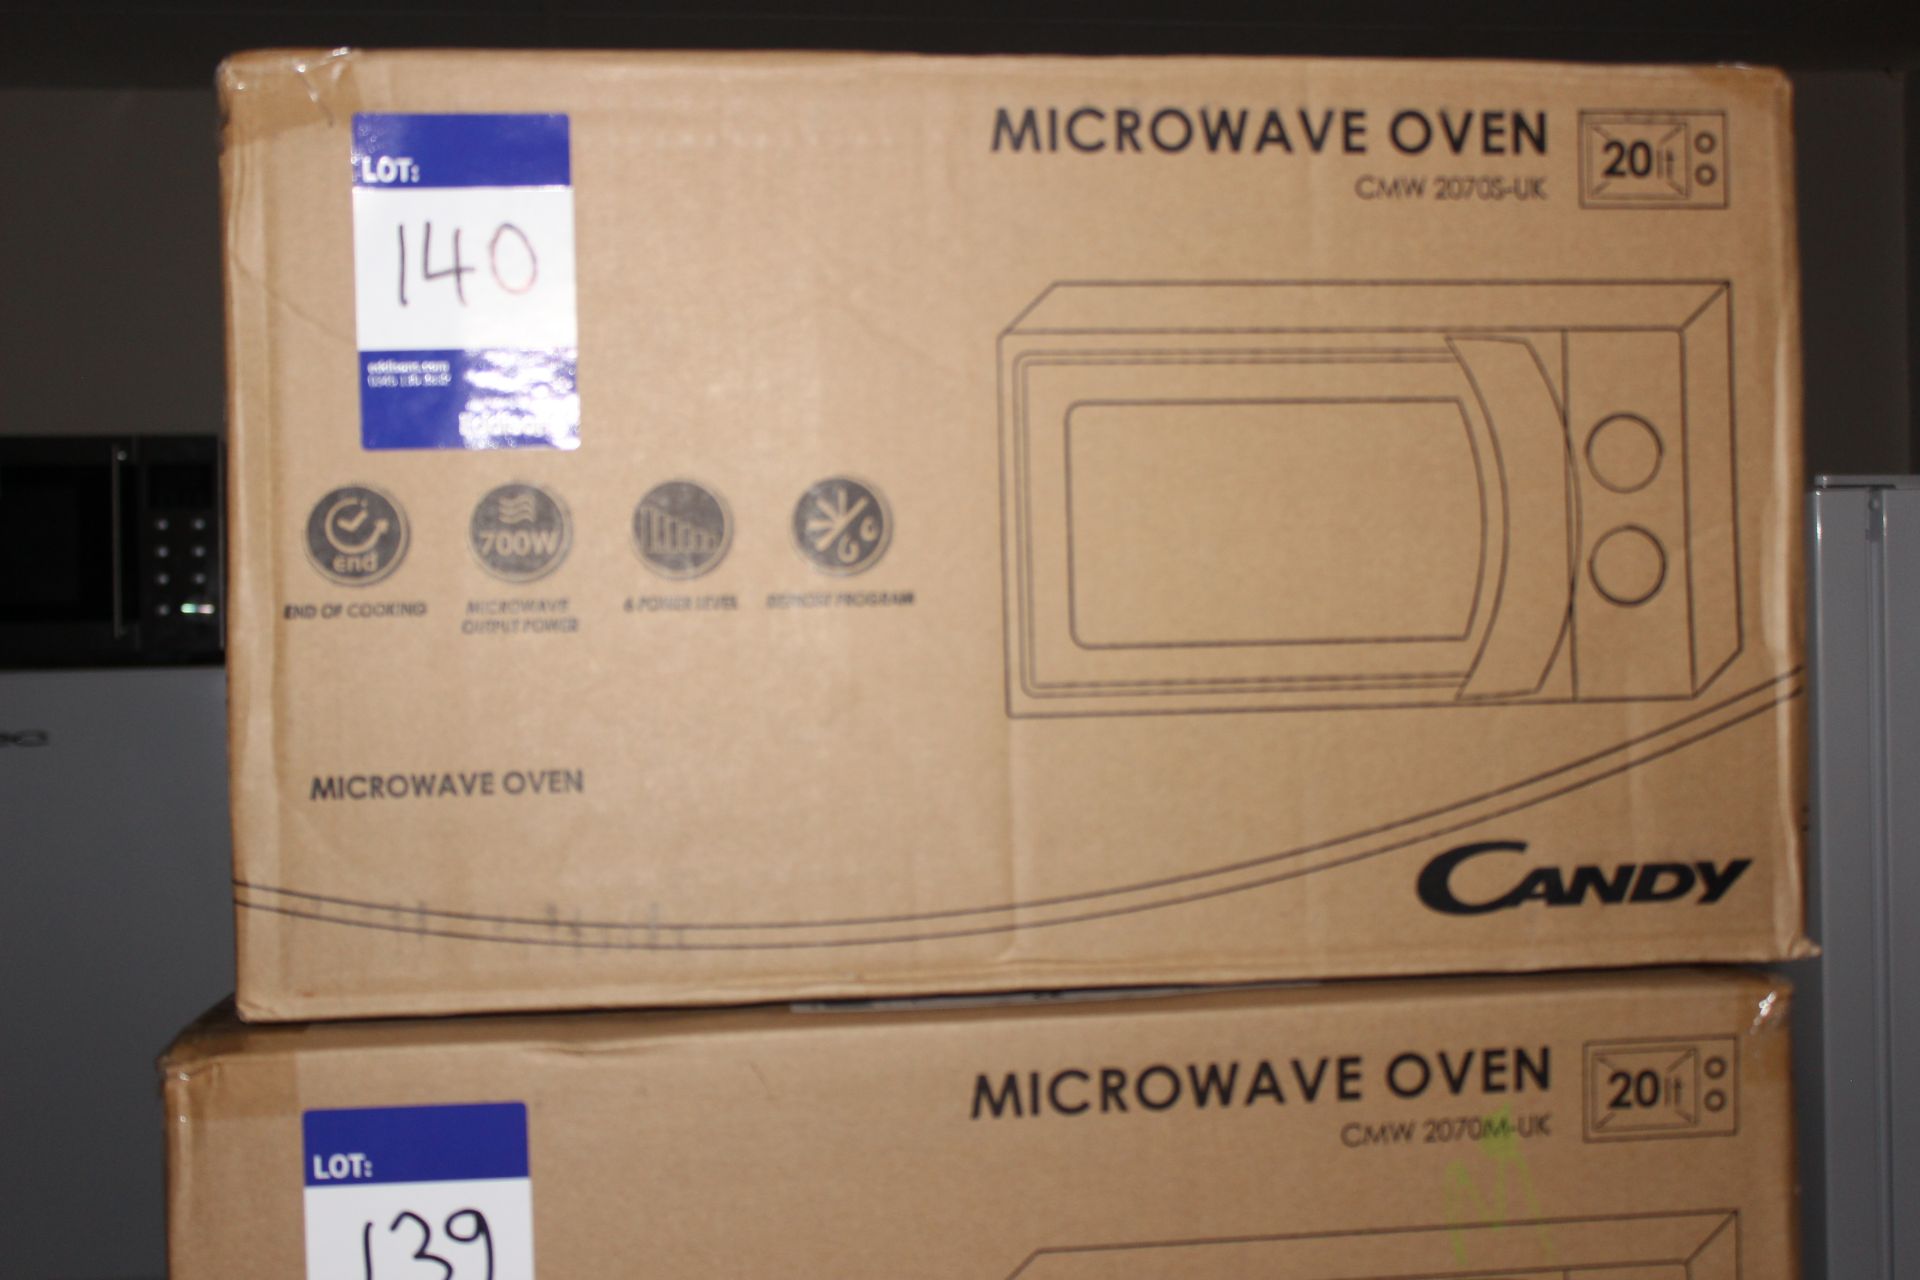 Candy Microwave Oven CMW2070S-UK